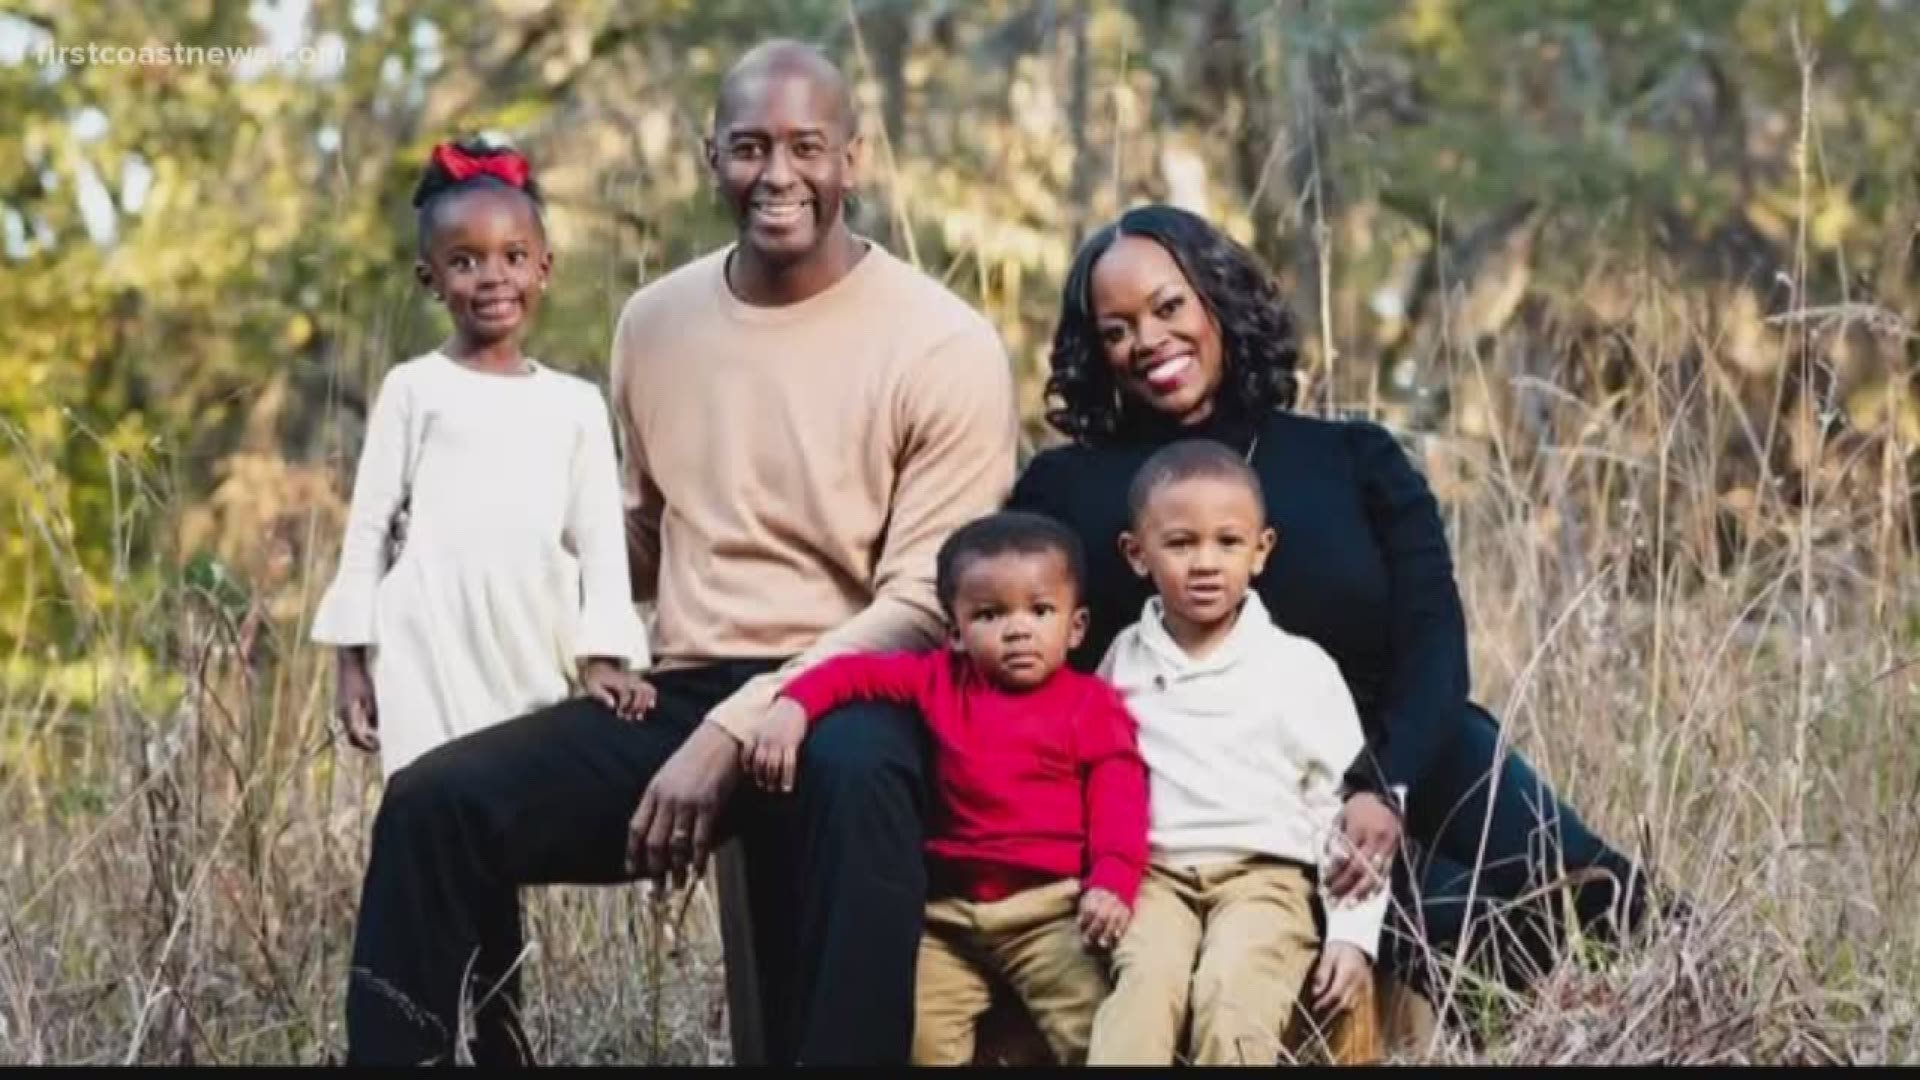 R. Jai Gillum speaks openly about miscarriage and going through IVF, saying there isn't enough outward support for fertility issues in our society.